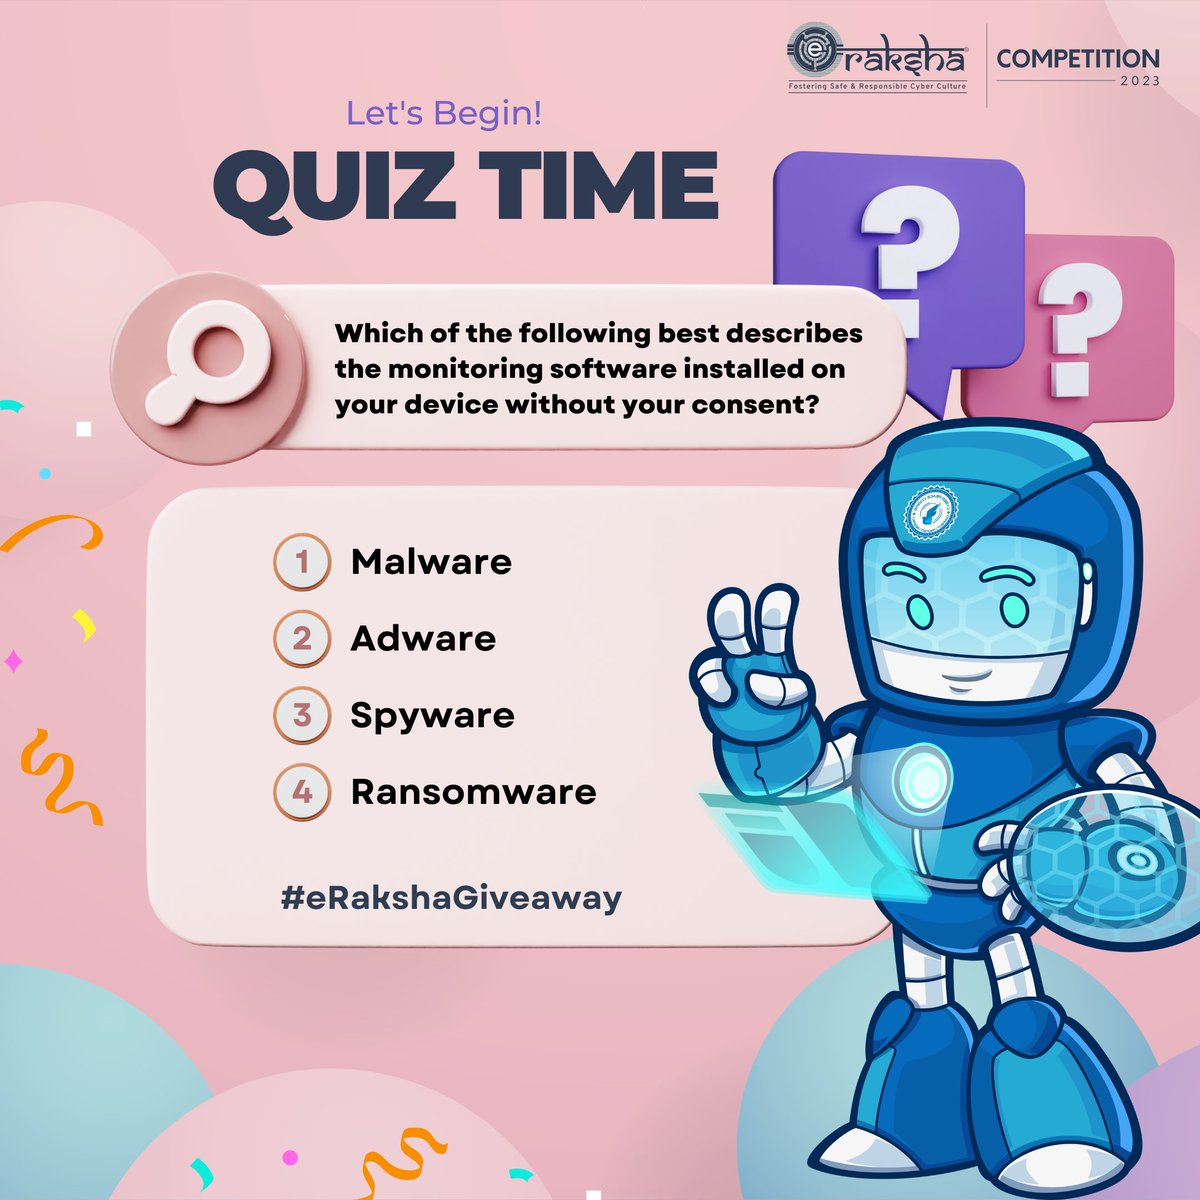 It's #Giveaway Time! Answer this quiz and stand a chance to win Gift Vouchers up to Rs 500!

#eRaksha #eRakshaGiveaway #ContestAlert #CyberPeace☮️ #contestalert #contest #giveaway #giveawaycontest #contestgiveaway #giveawayalert #win #giveaways #giveawaytime #instagiveaway…